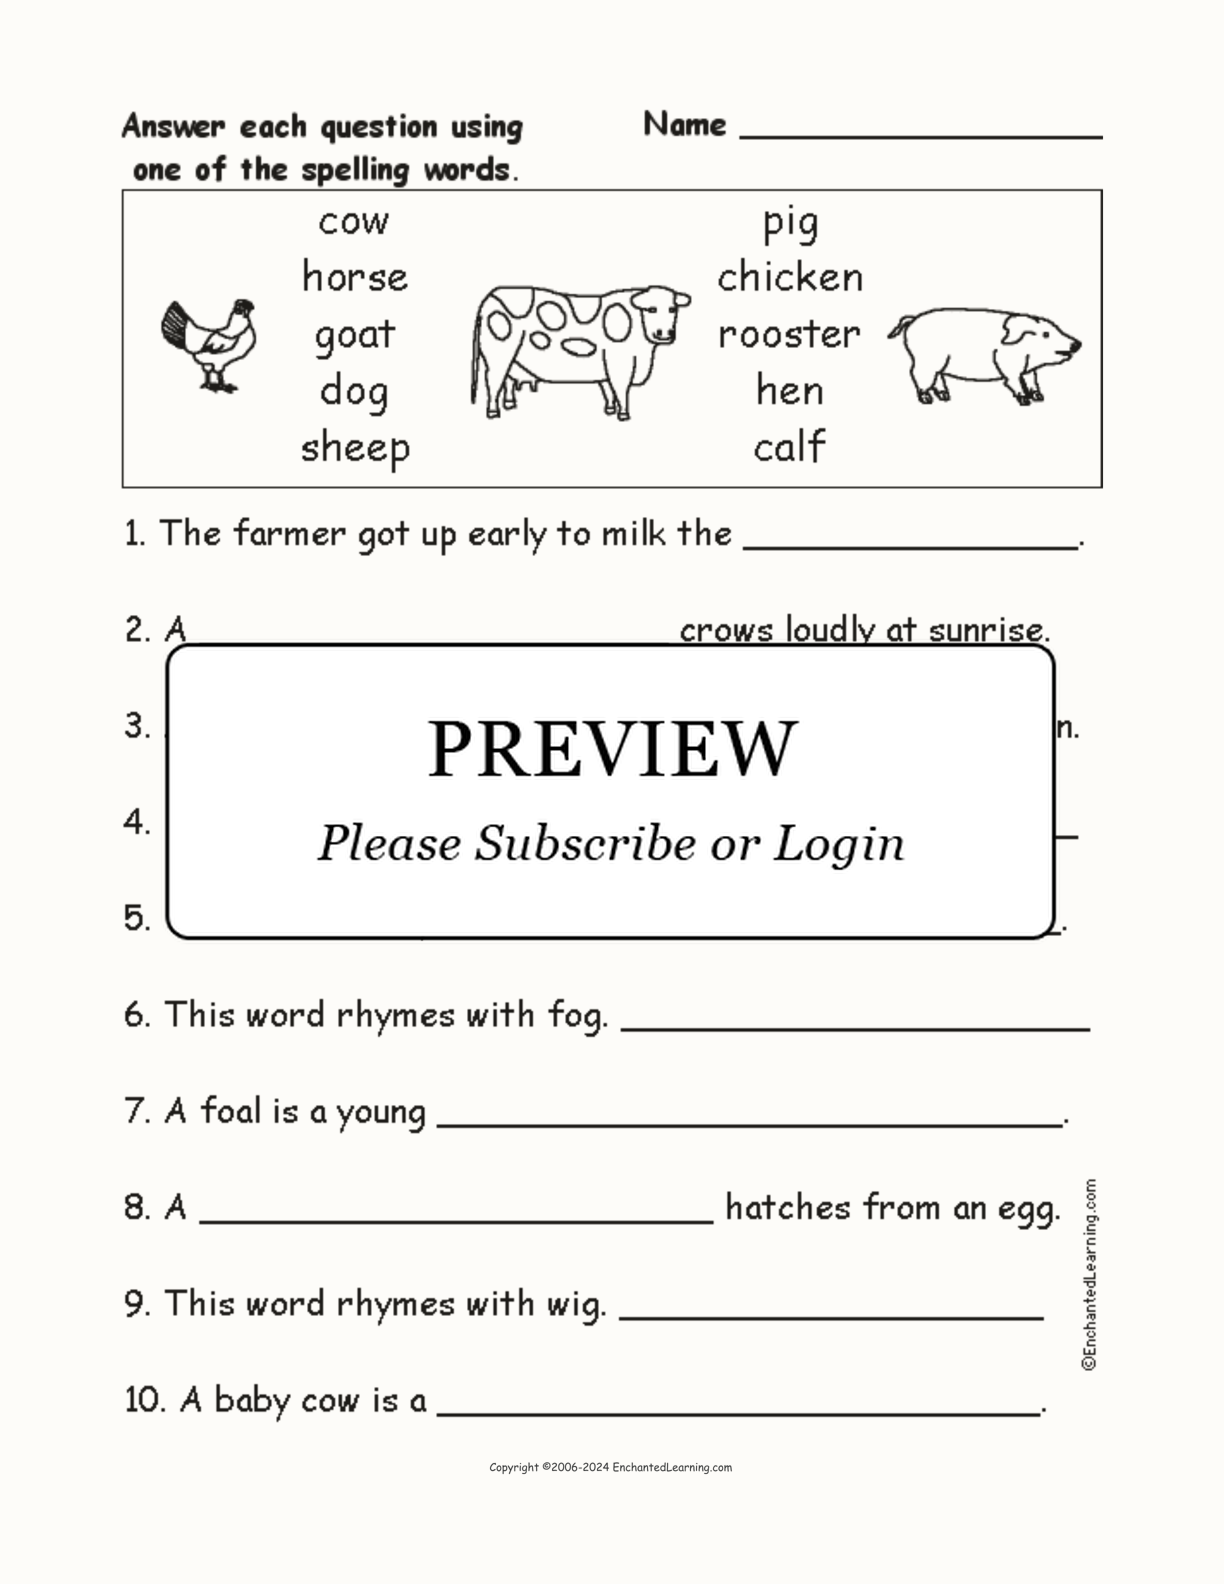 Farm Animals: Spelling Word Questions interactive worksheet page 1